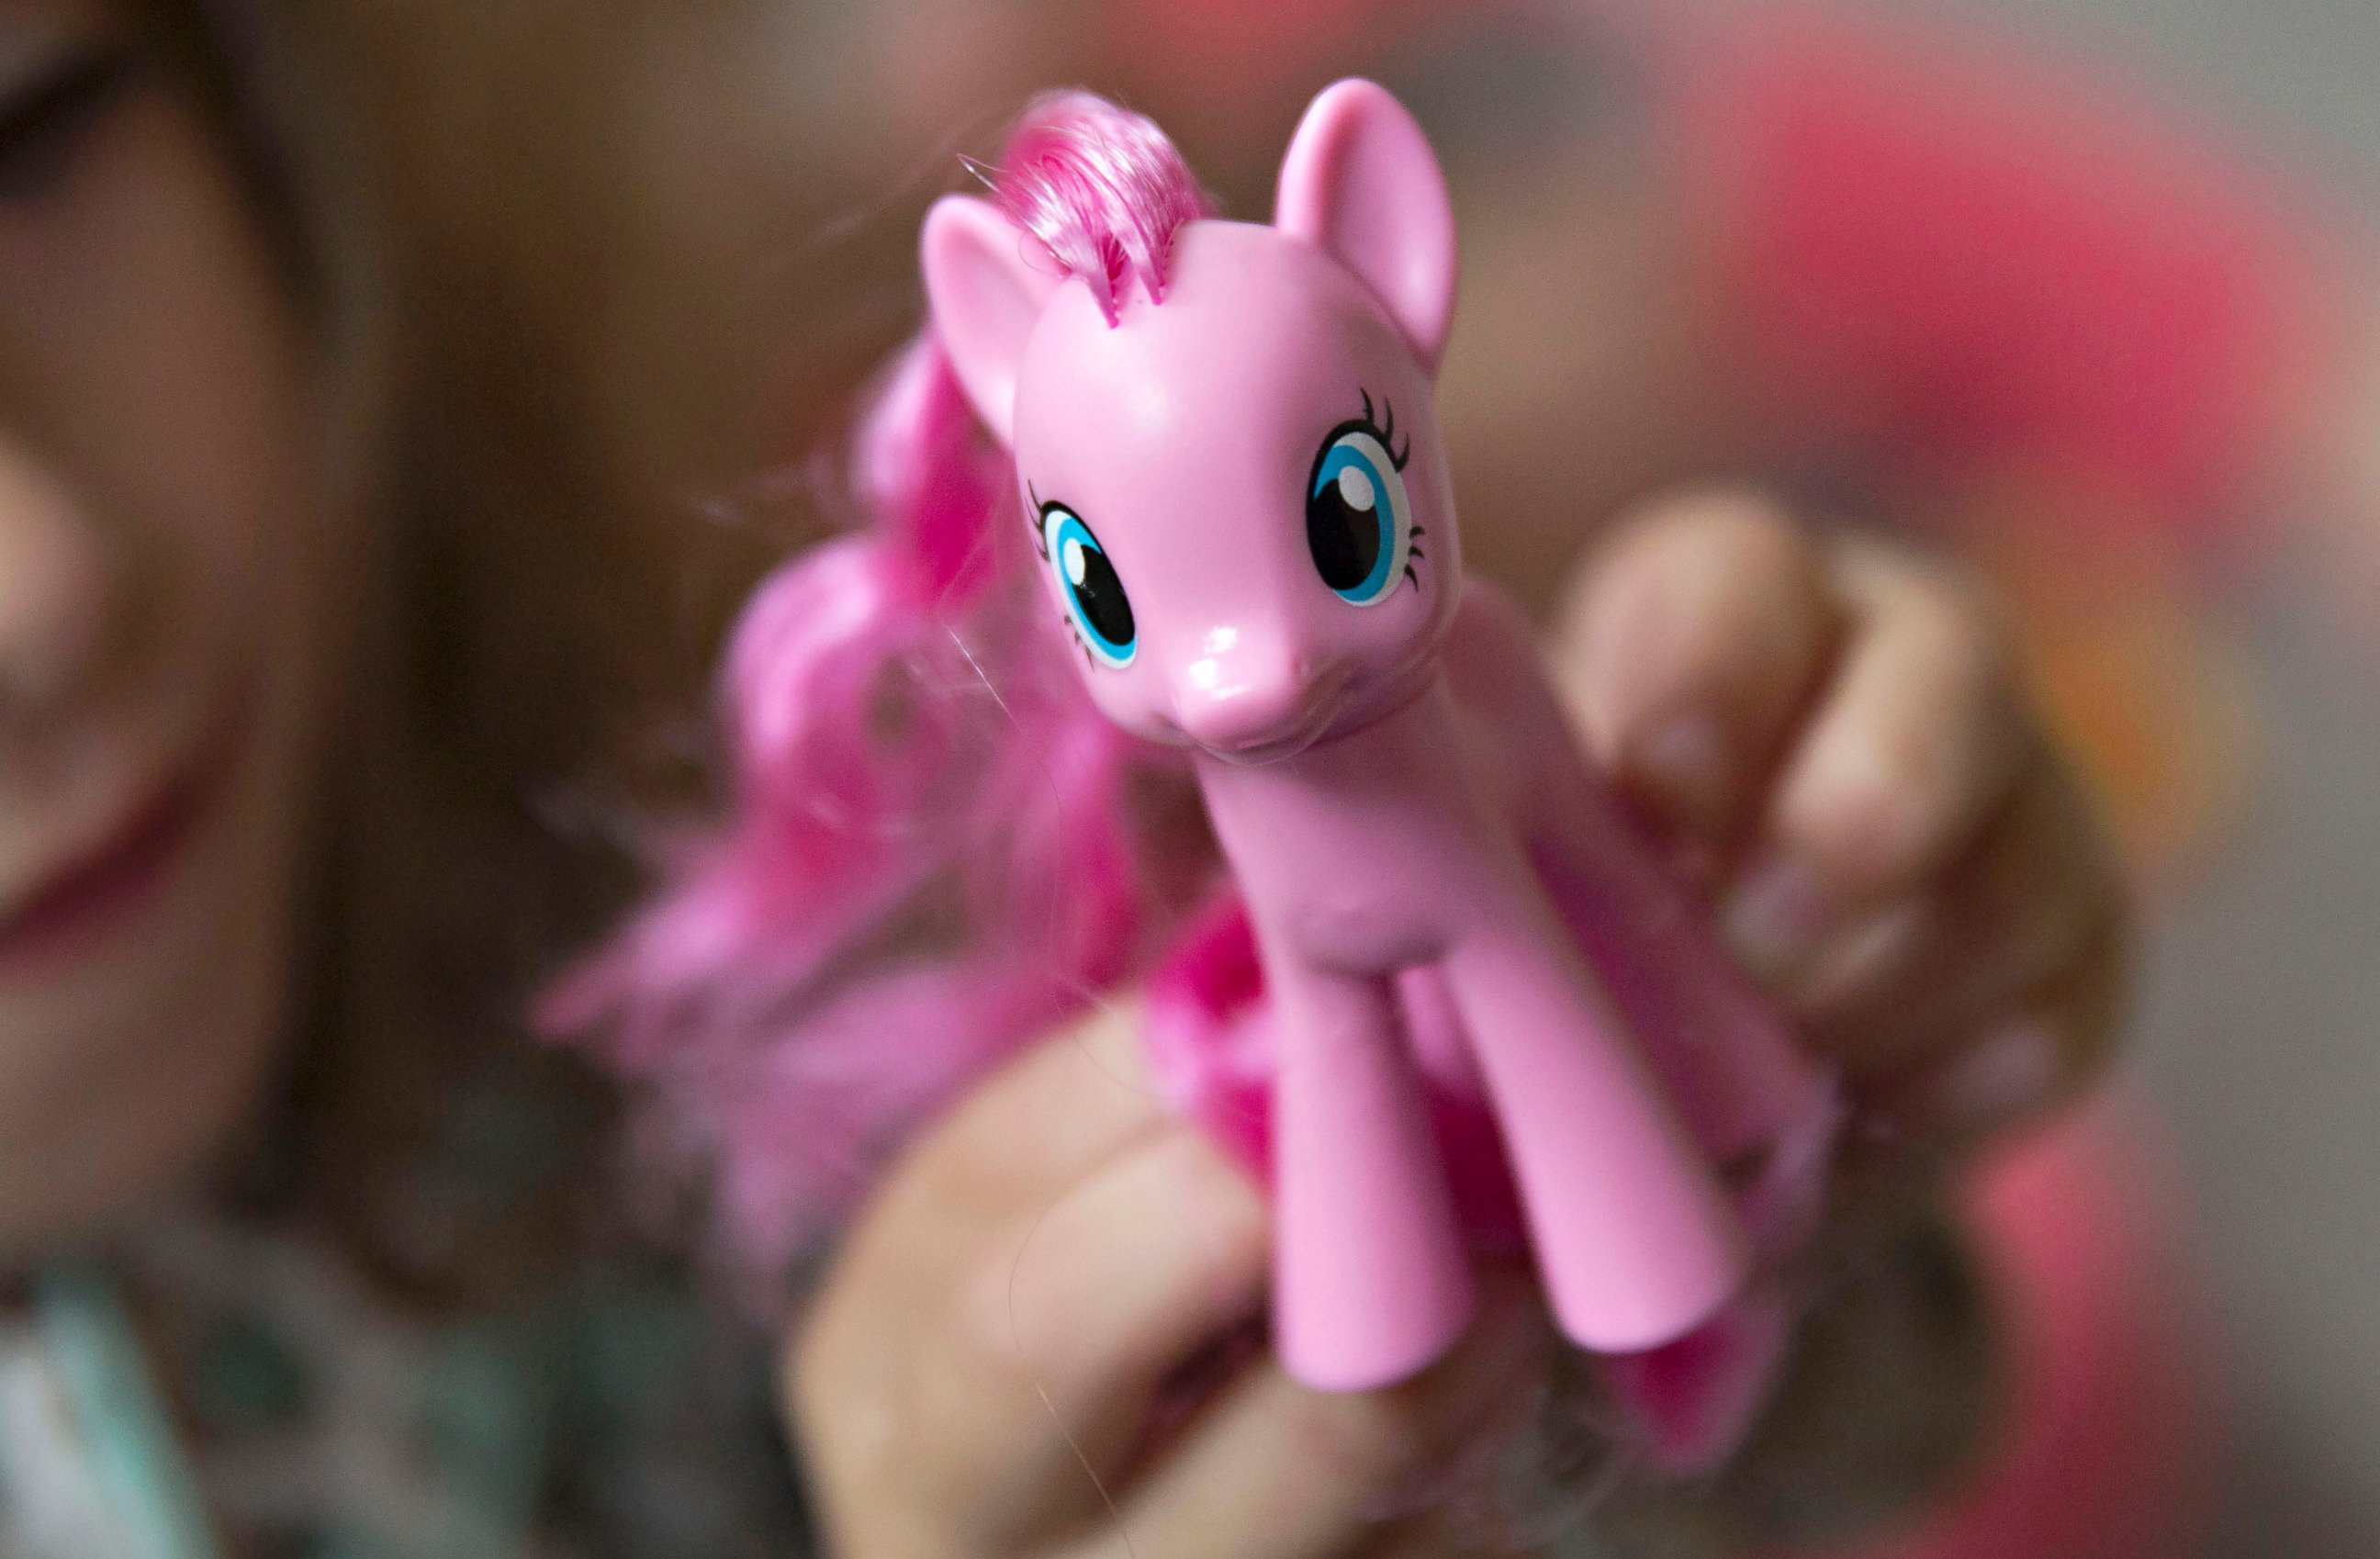 PHOTO: A young girl plays with a Hasbro Inc. My Little Pony character in Tiskilwa, Illinois, July 16, 2015.